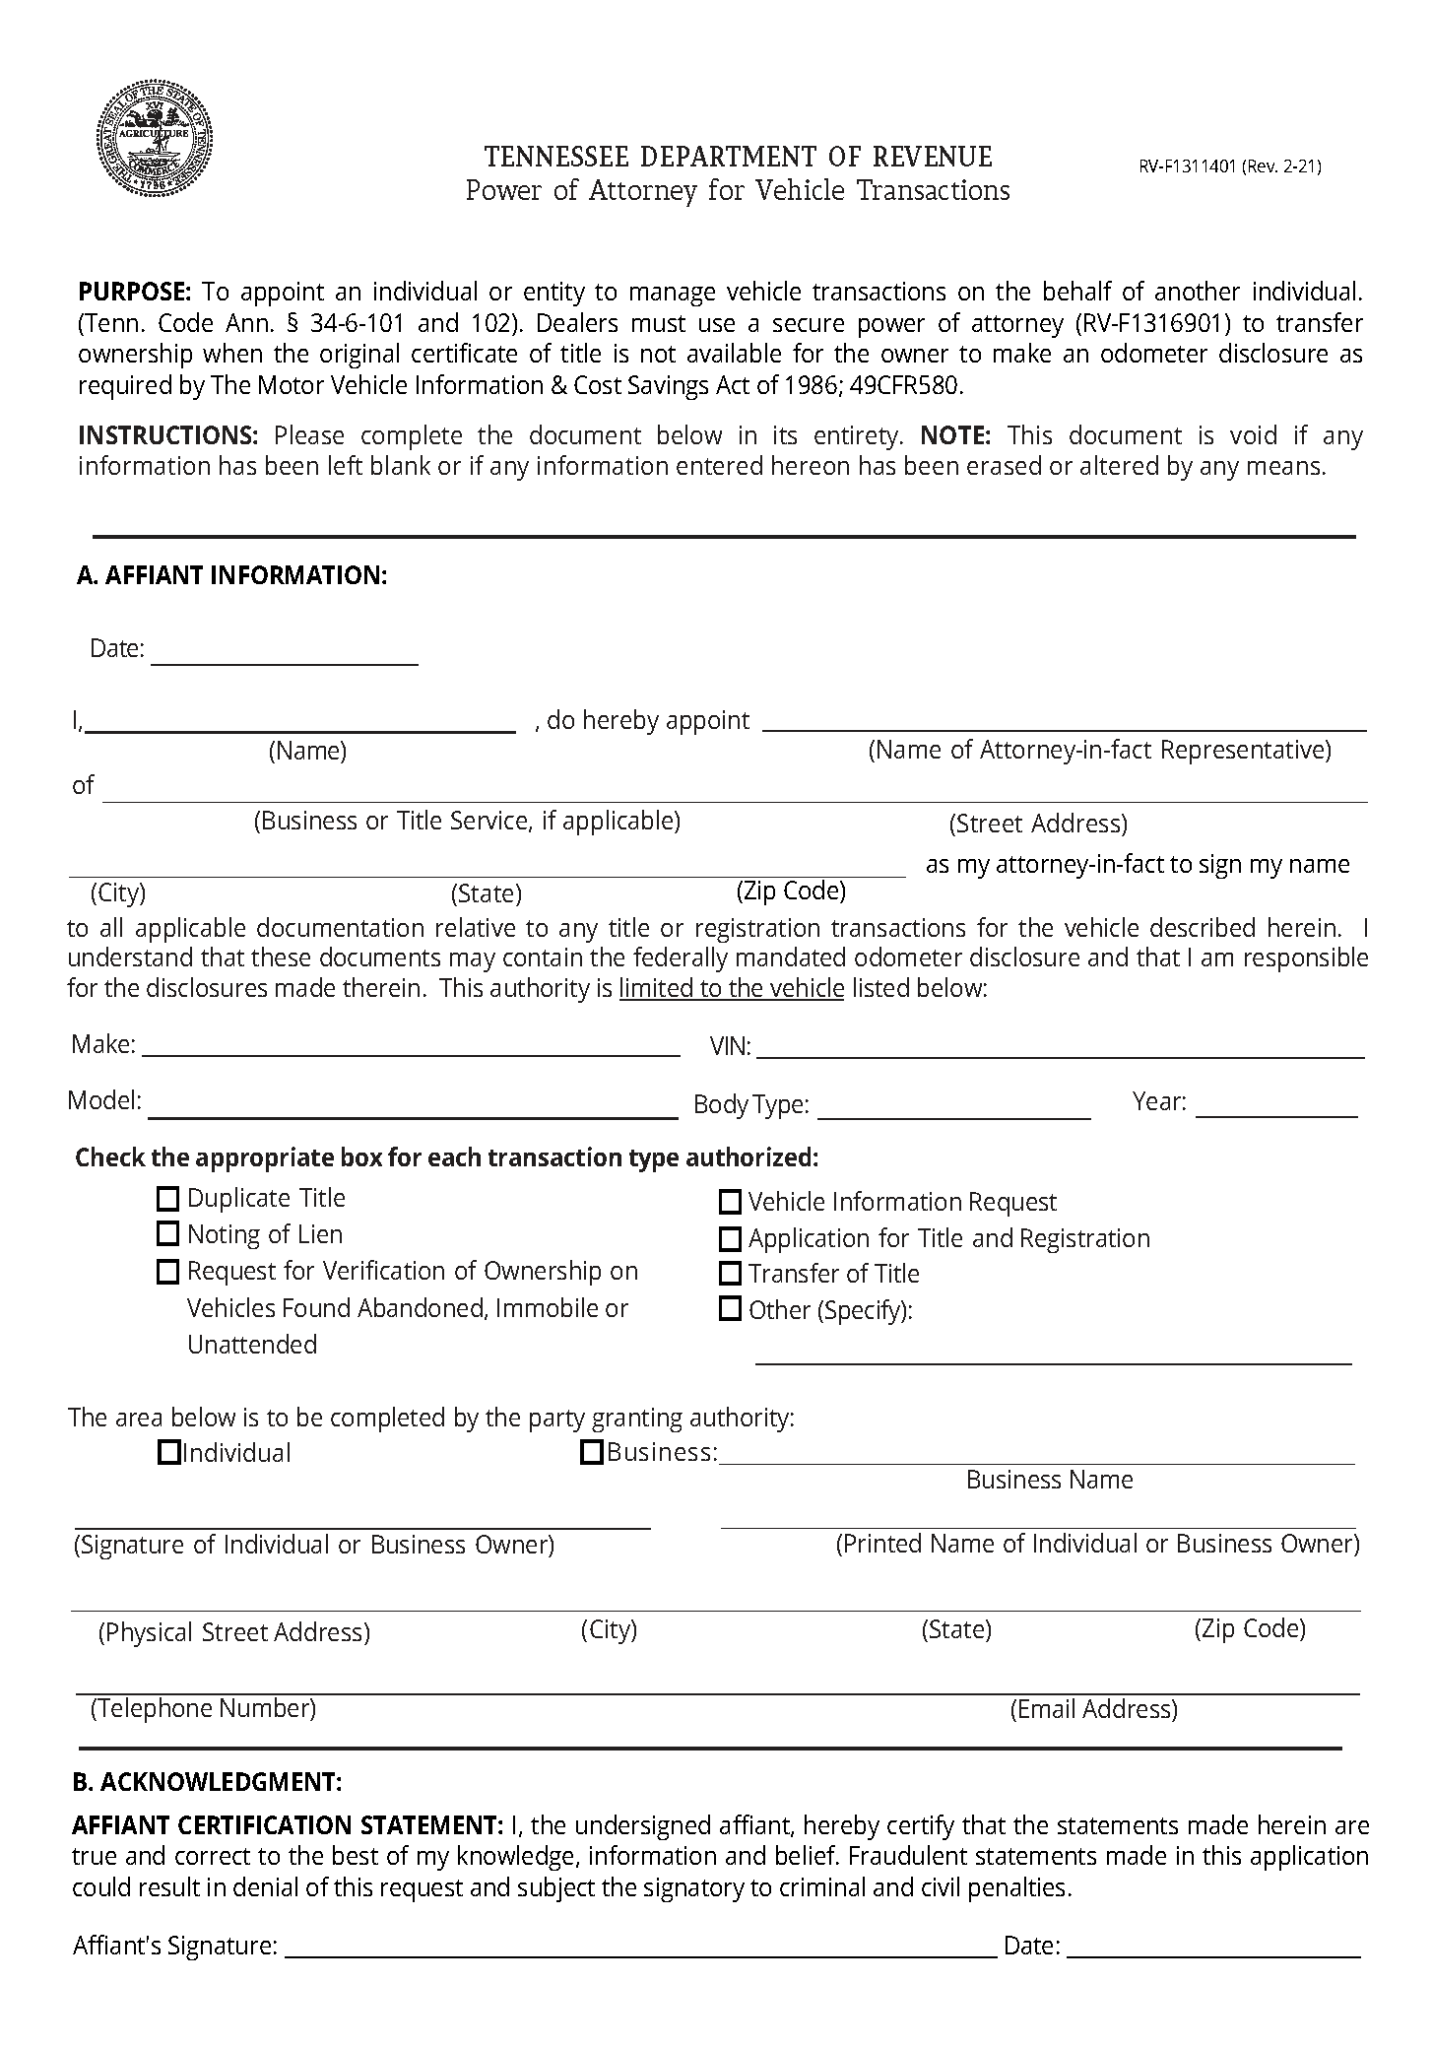 Free Tennessee Motor Vehicle Power of Attorney (Form RVF1311401) PDF